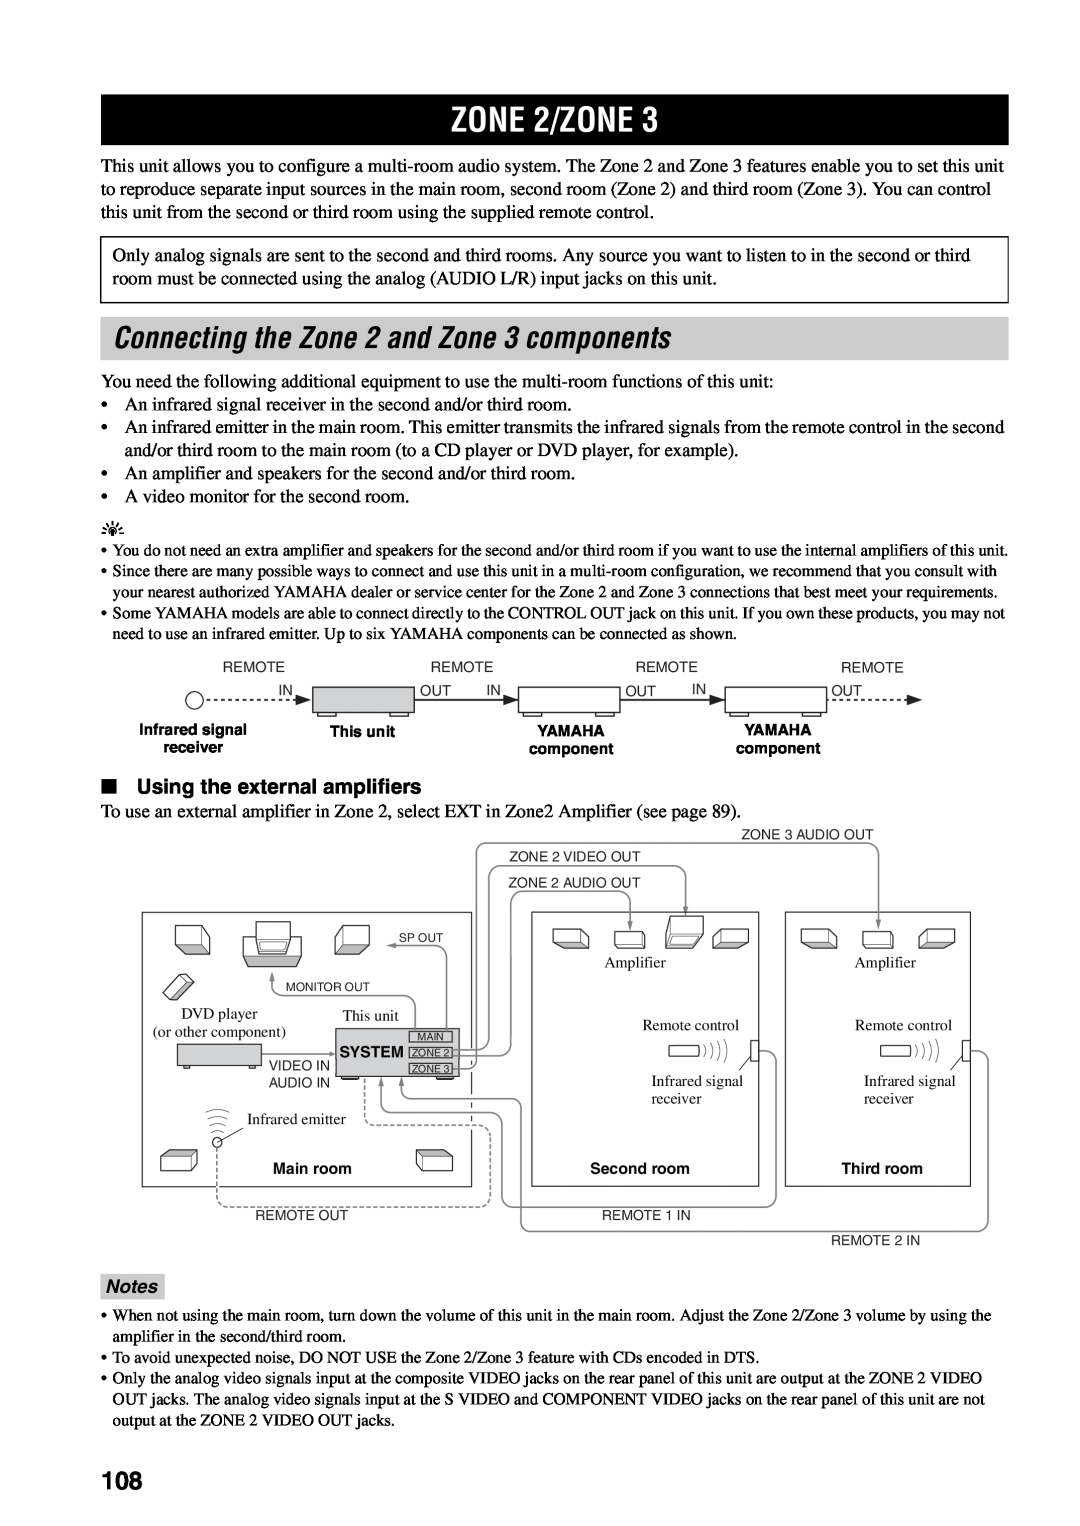 Yamaha RX-V2600 owner manual ZONE 2/ZONE, Connecting the Zone 2 and Zone 3 components, Using the external amplifiers 